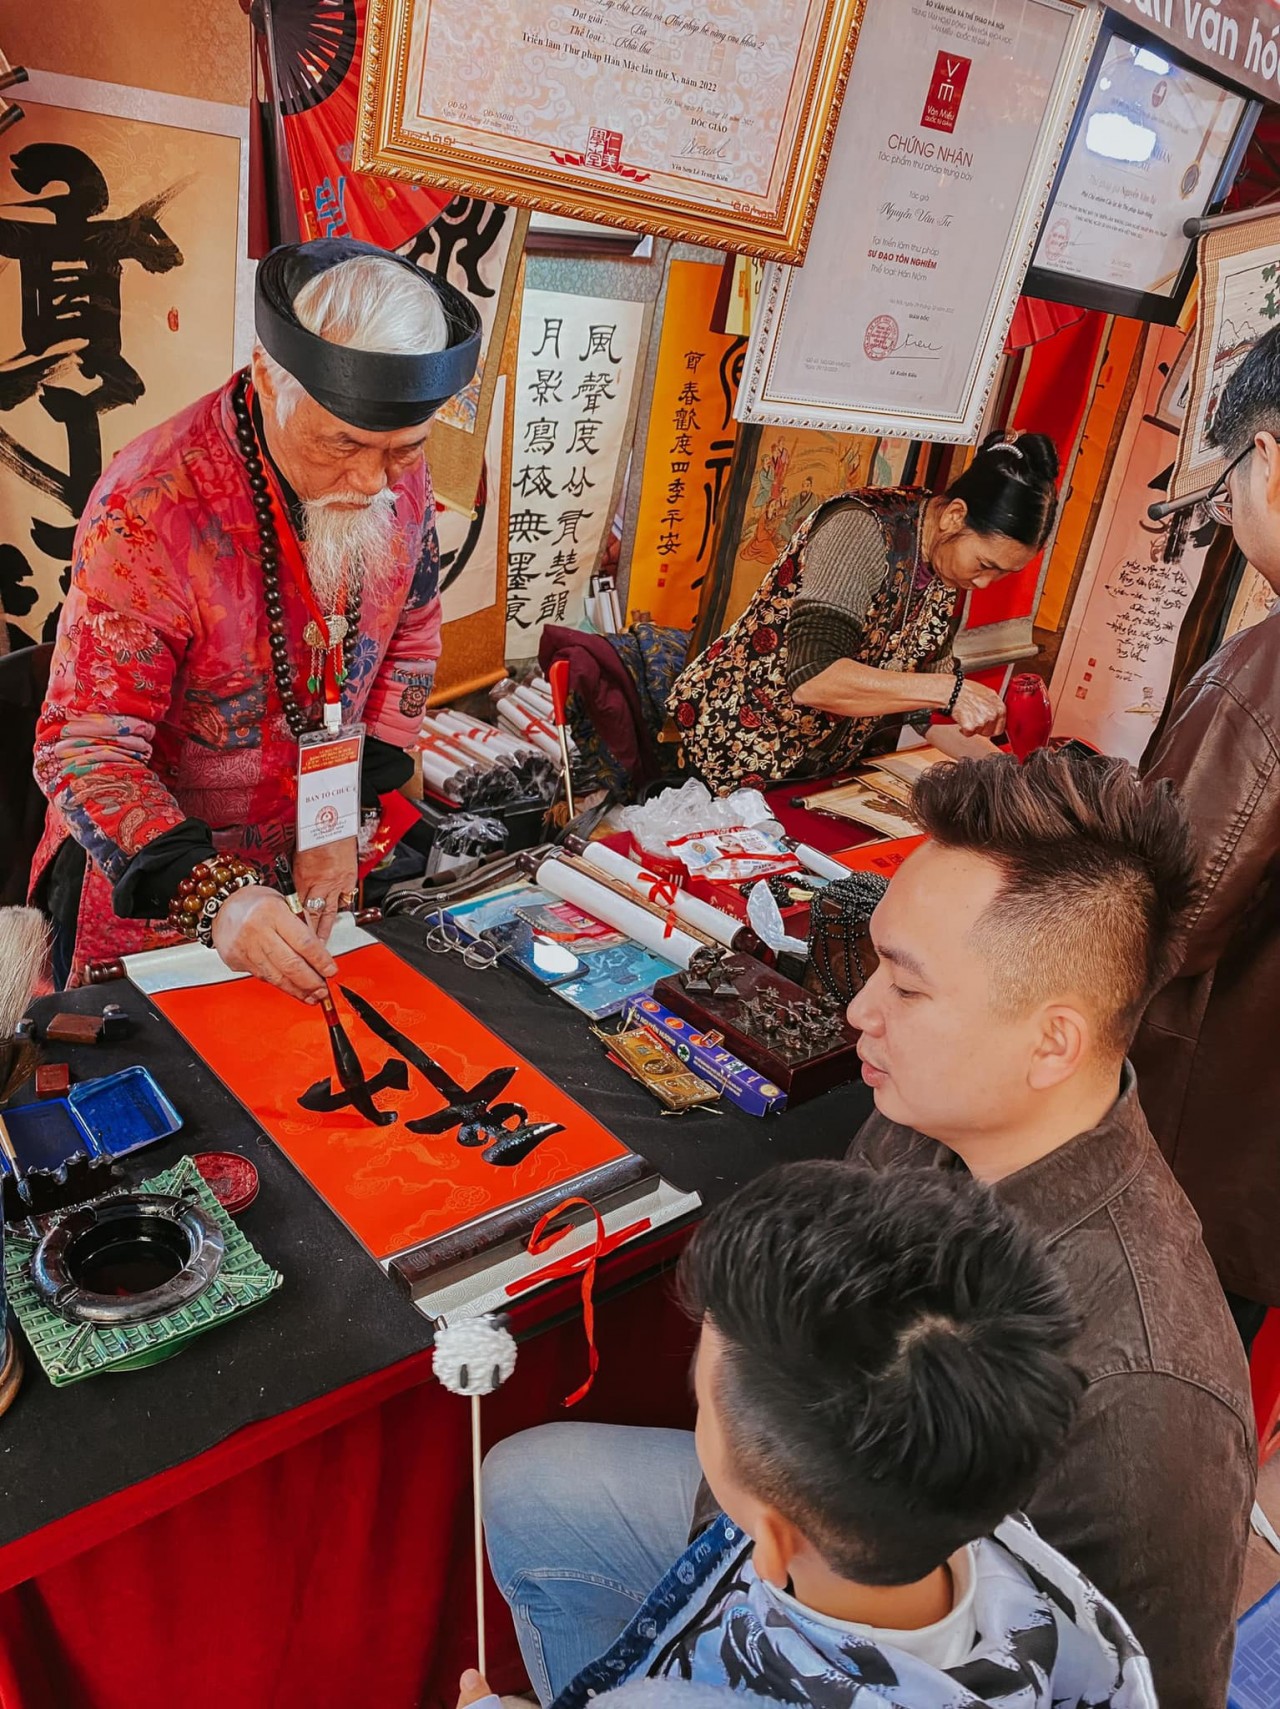 Seeking calligraphy works of lucky words is among the elegant hobbies of Vietnamese people during the traditional Lunar New Year (Tet) holiday